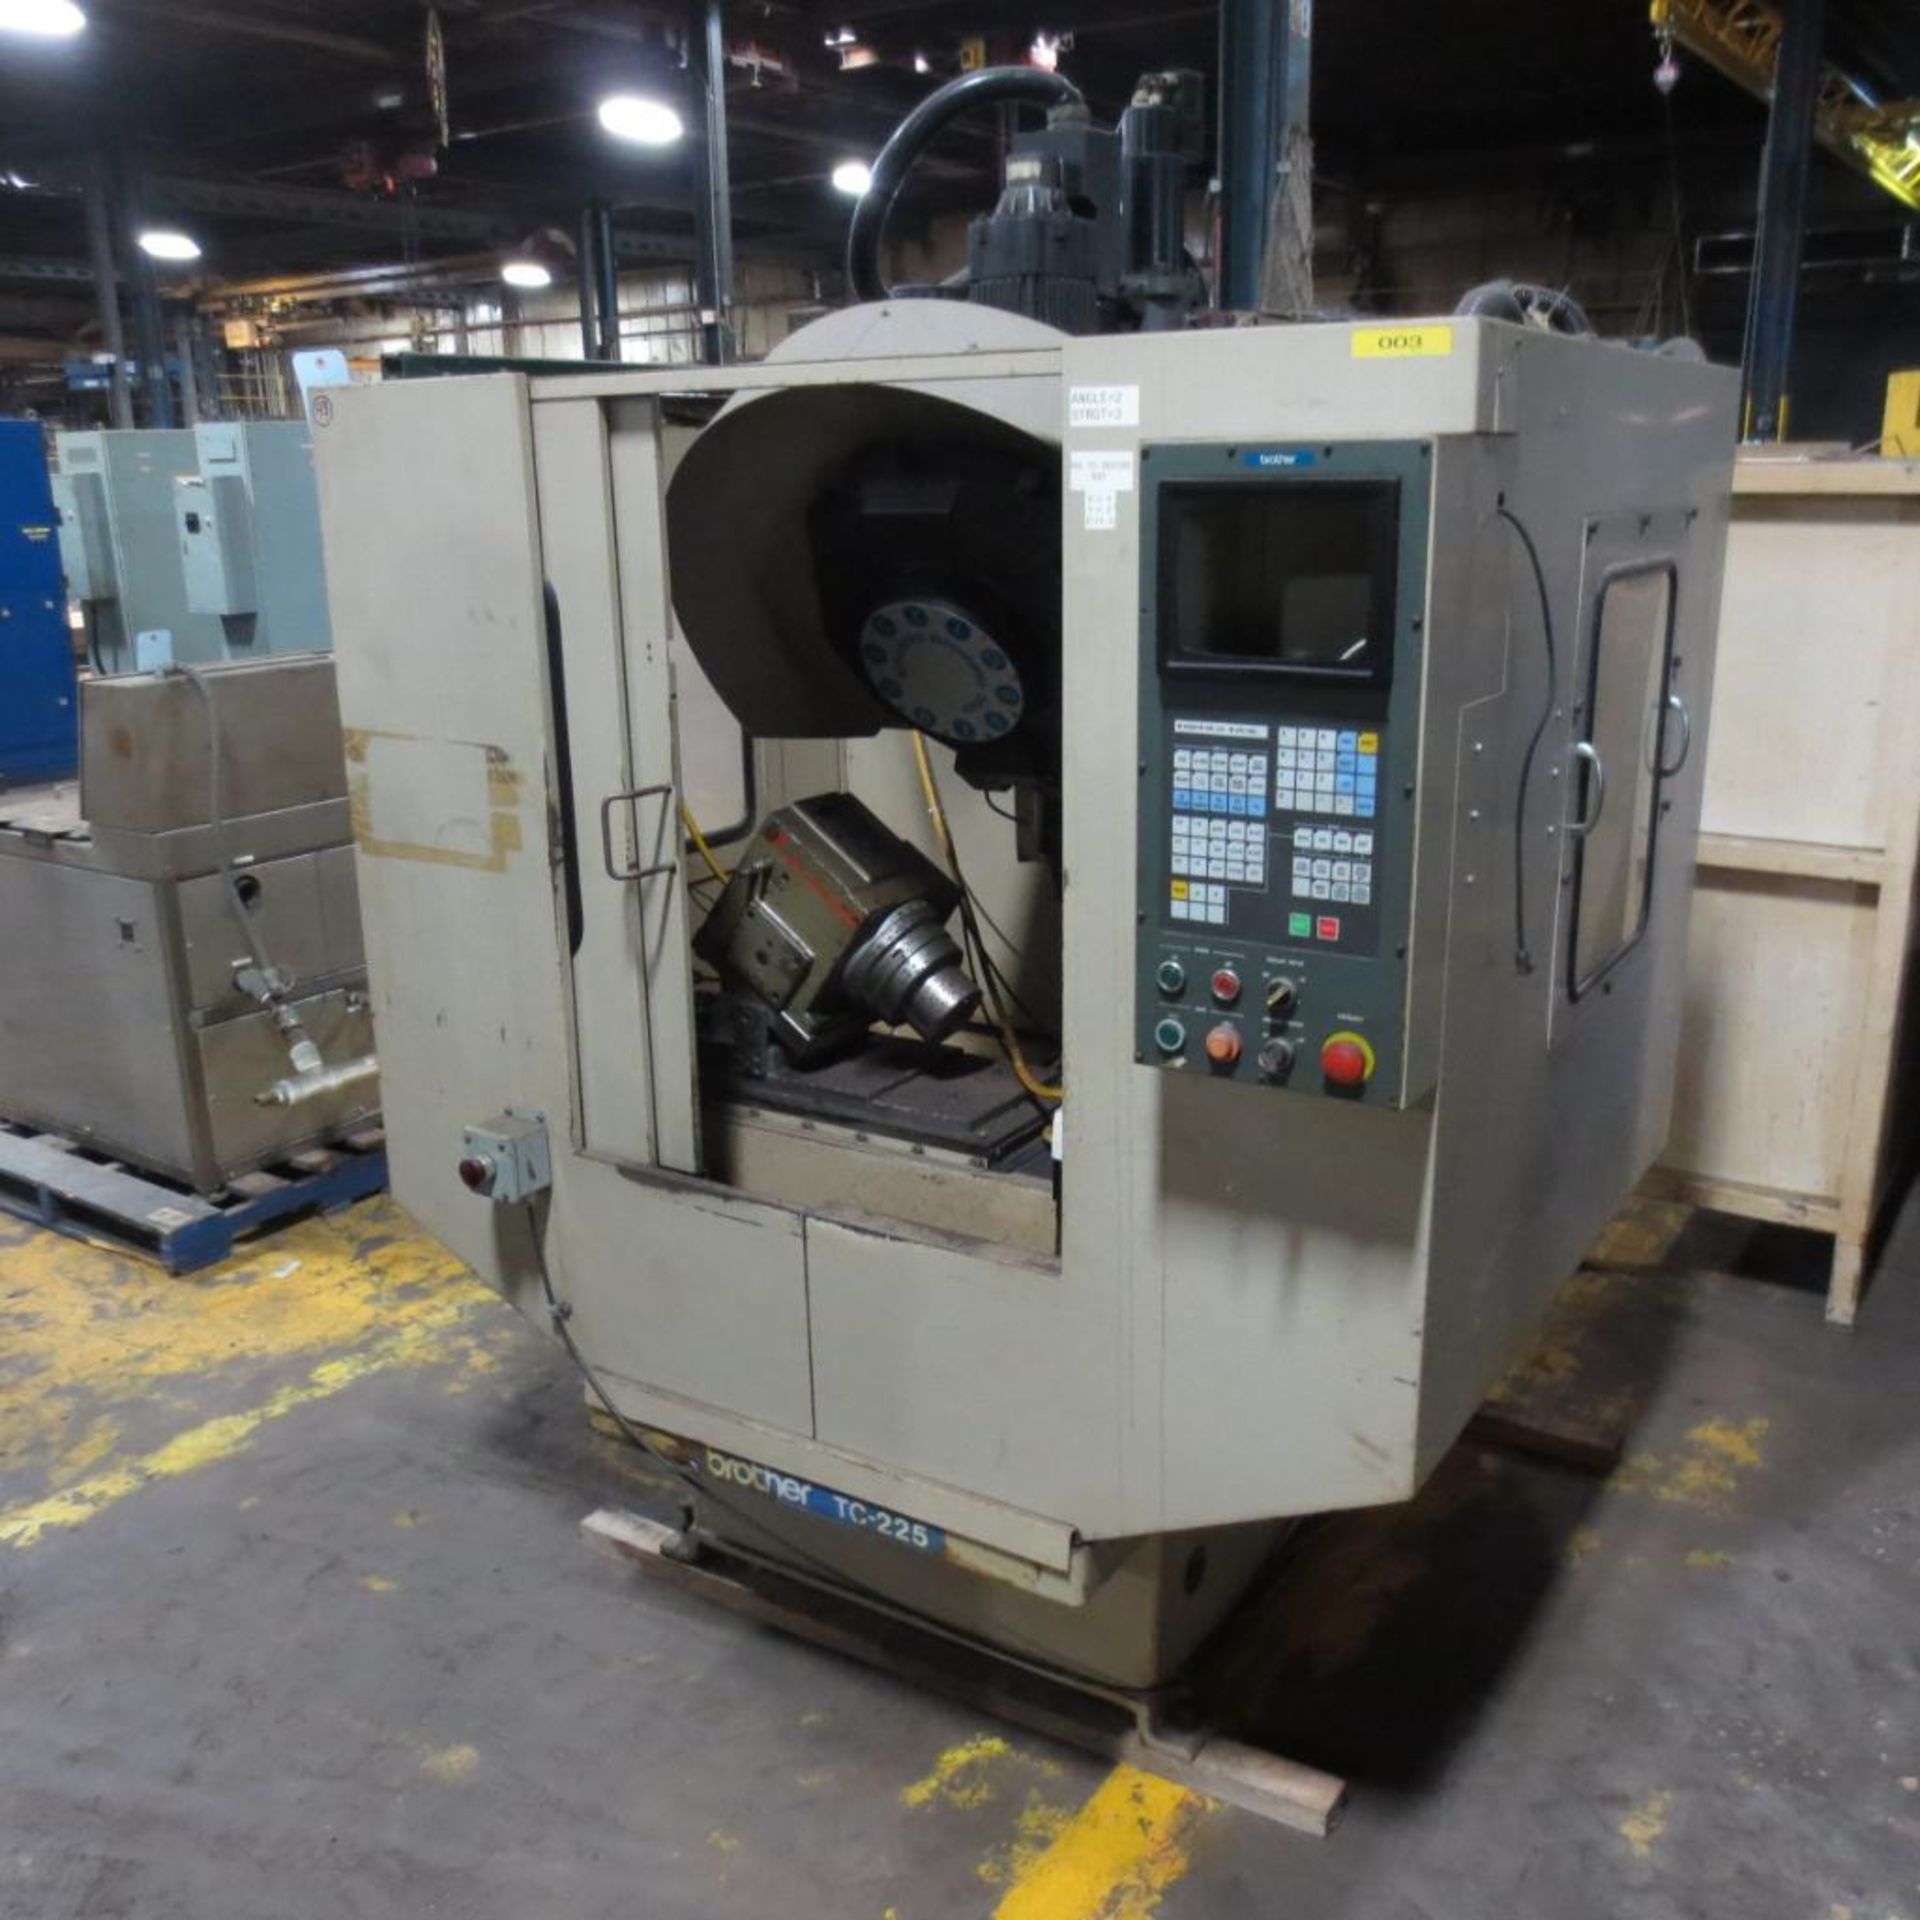 Brother TC-225 CNC Tapping Center. Loading Fee is $350.00